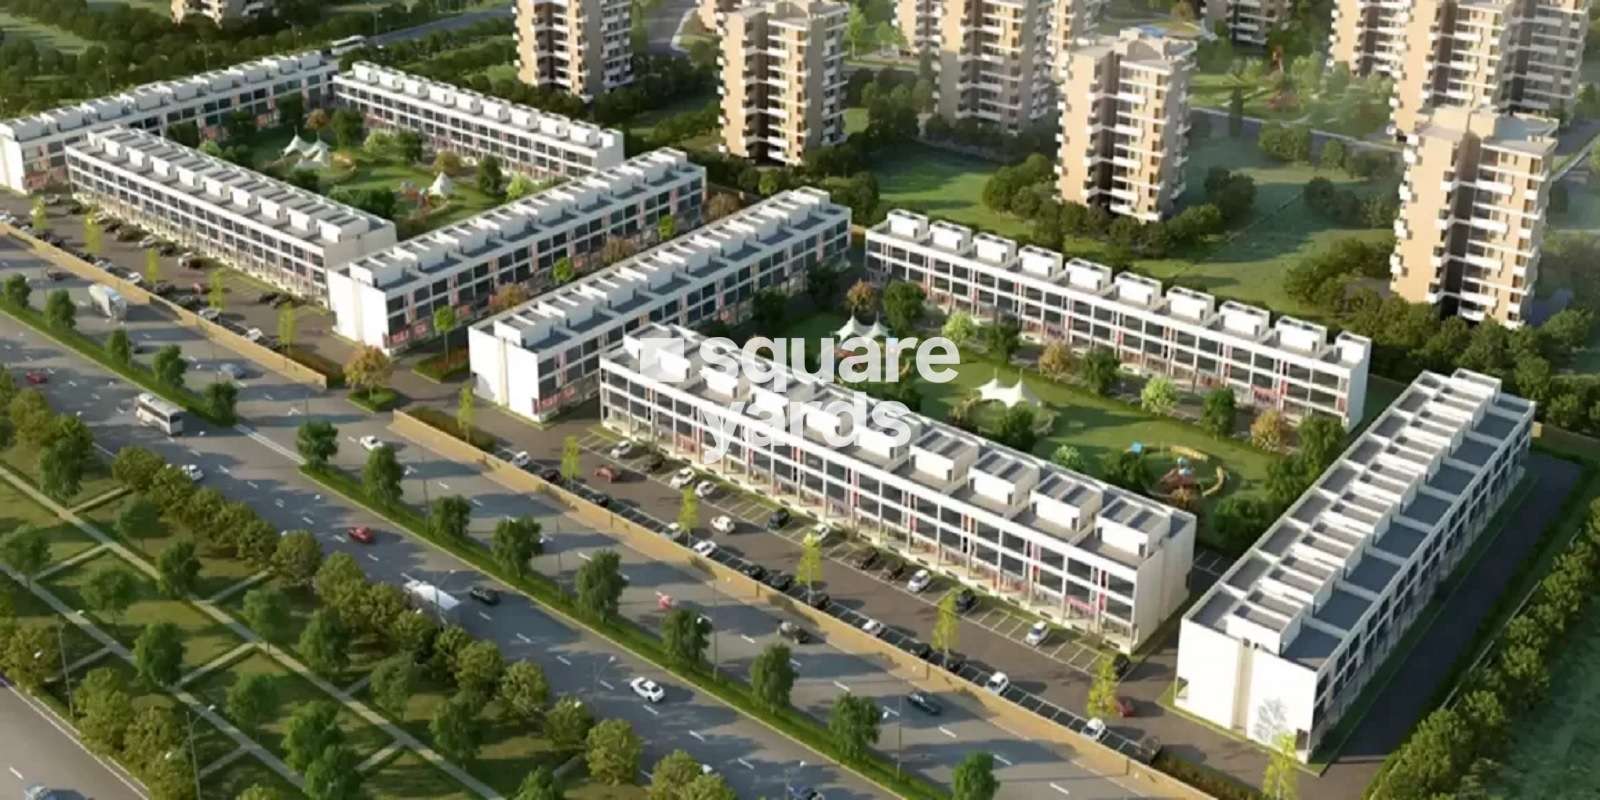 Jaypee Greens Tanishq Square Cover Image